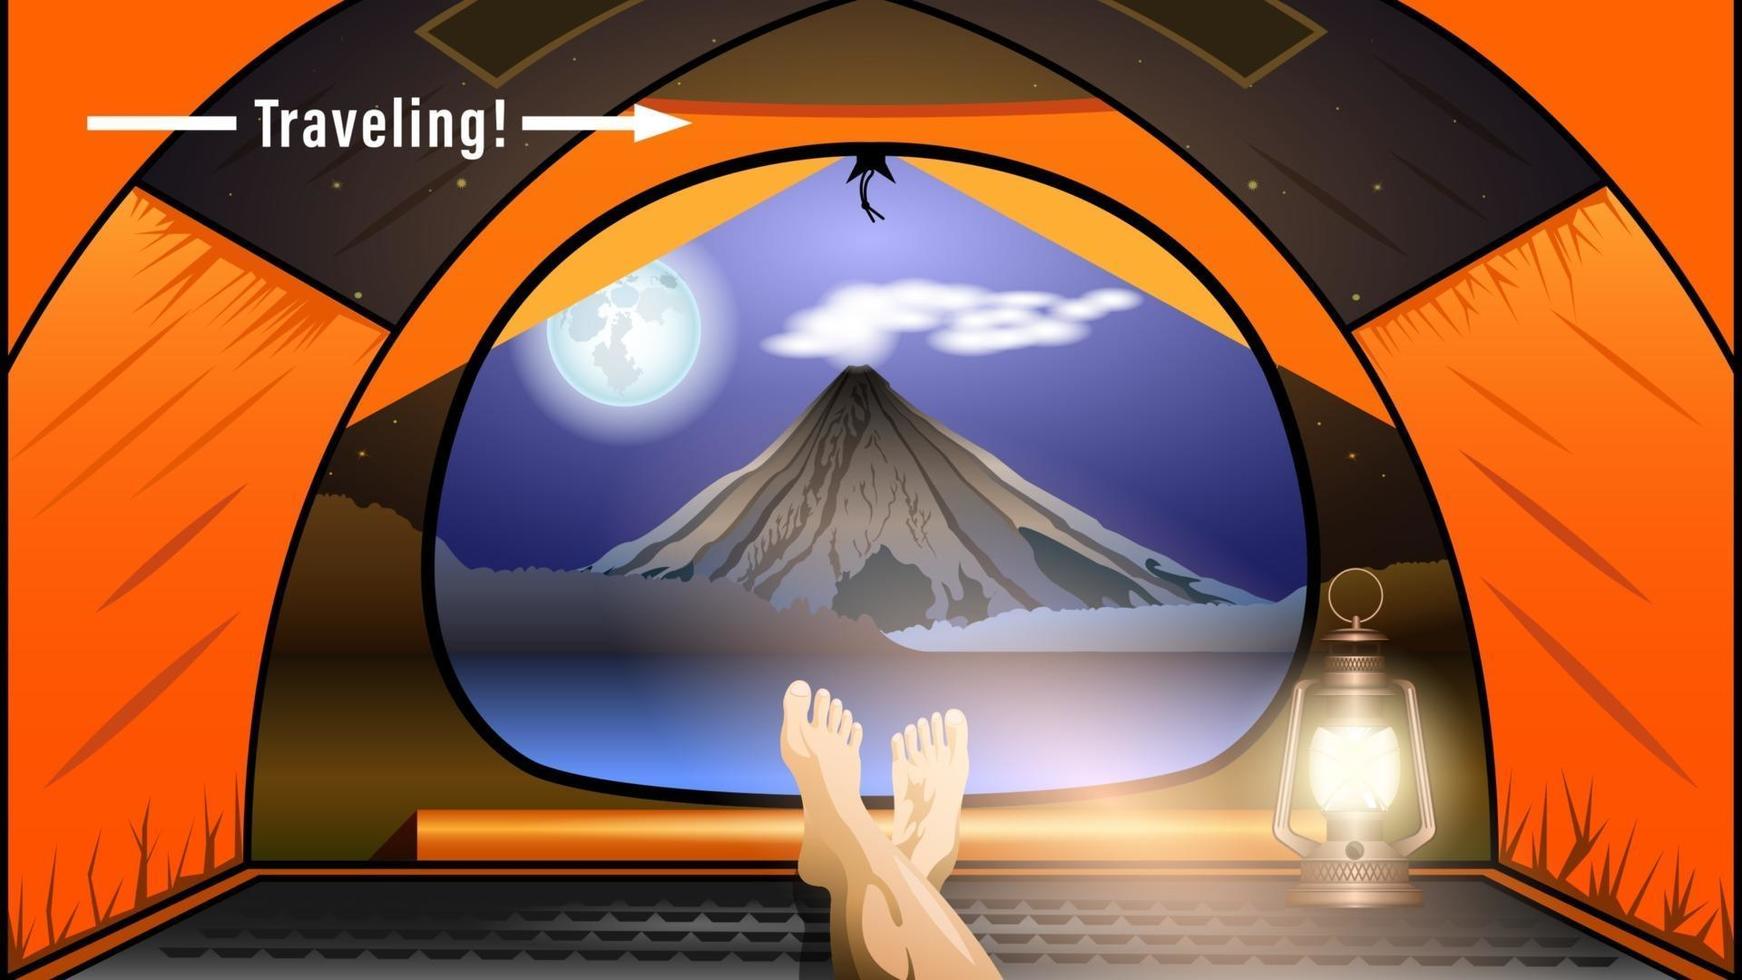 Traveling view from the tent night vector